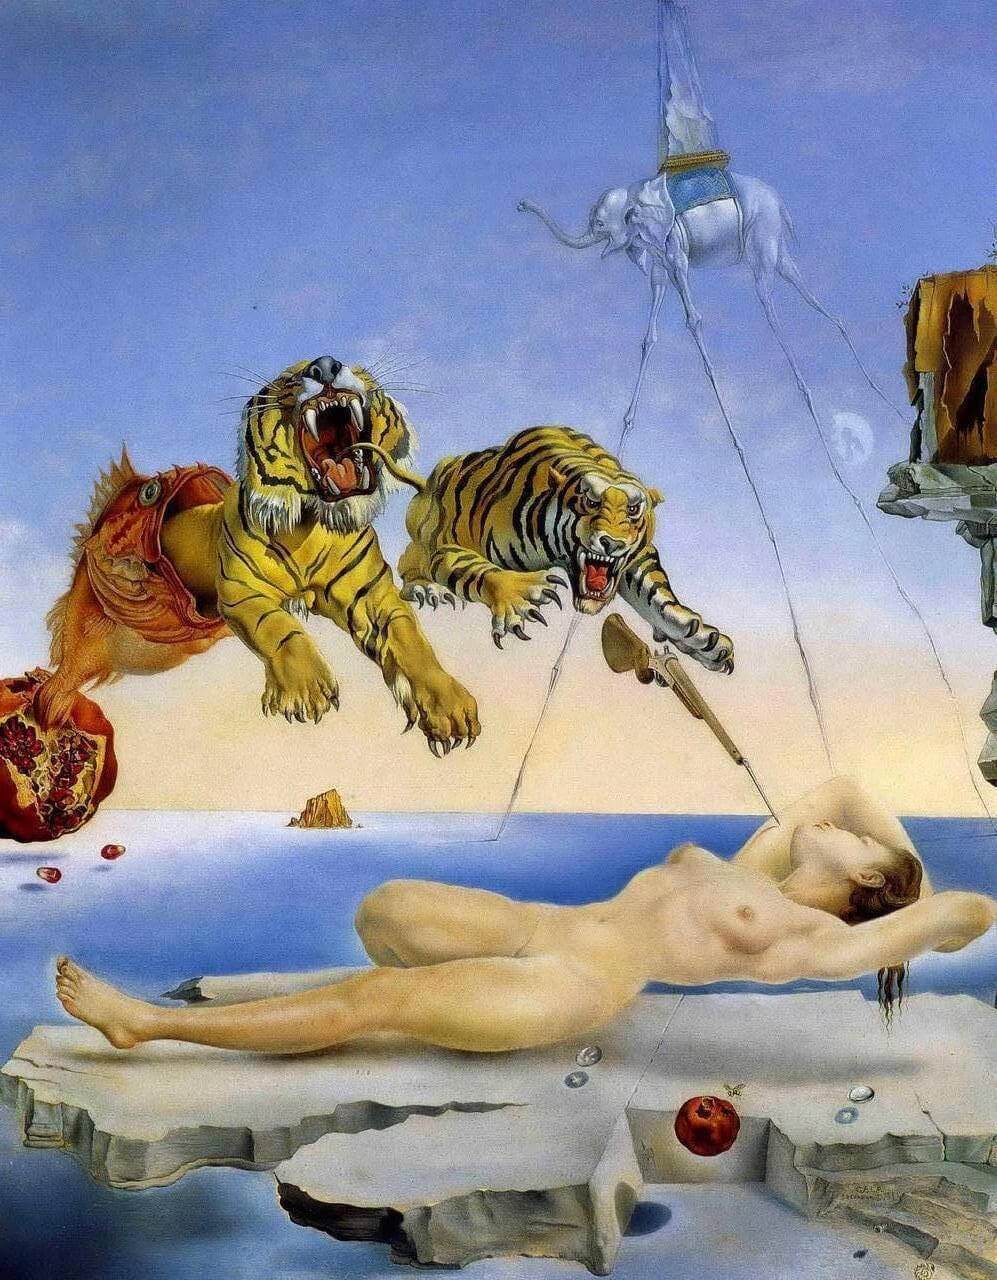 Freud's influence on Dali's surreal dream art - Park West Gallery